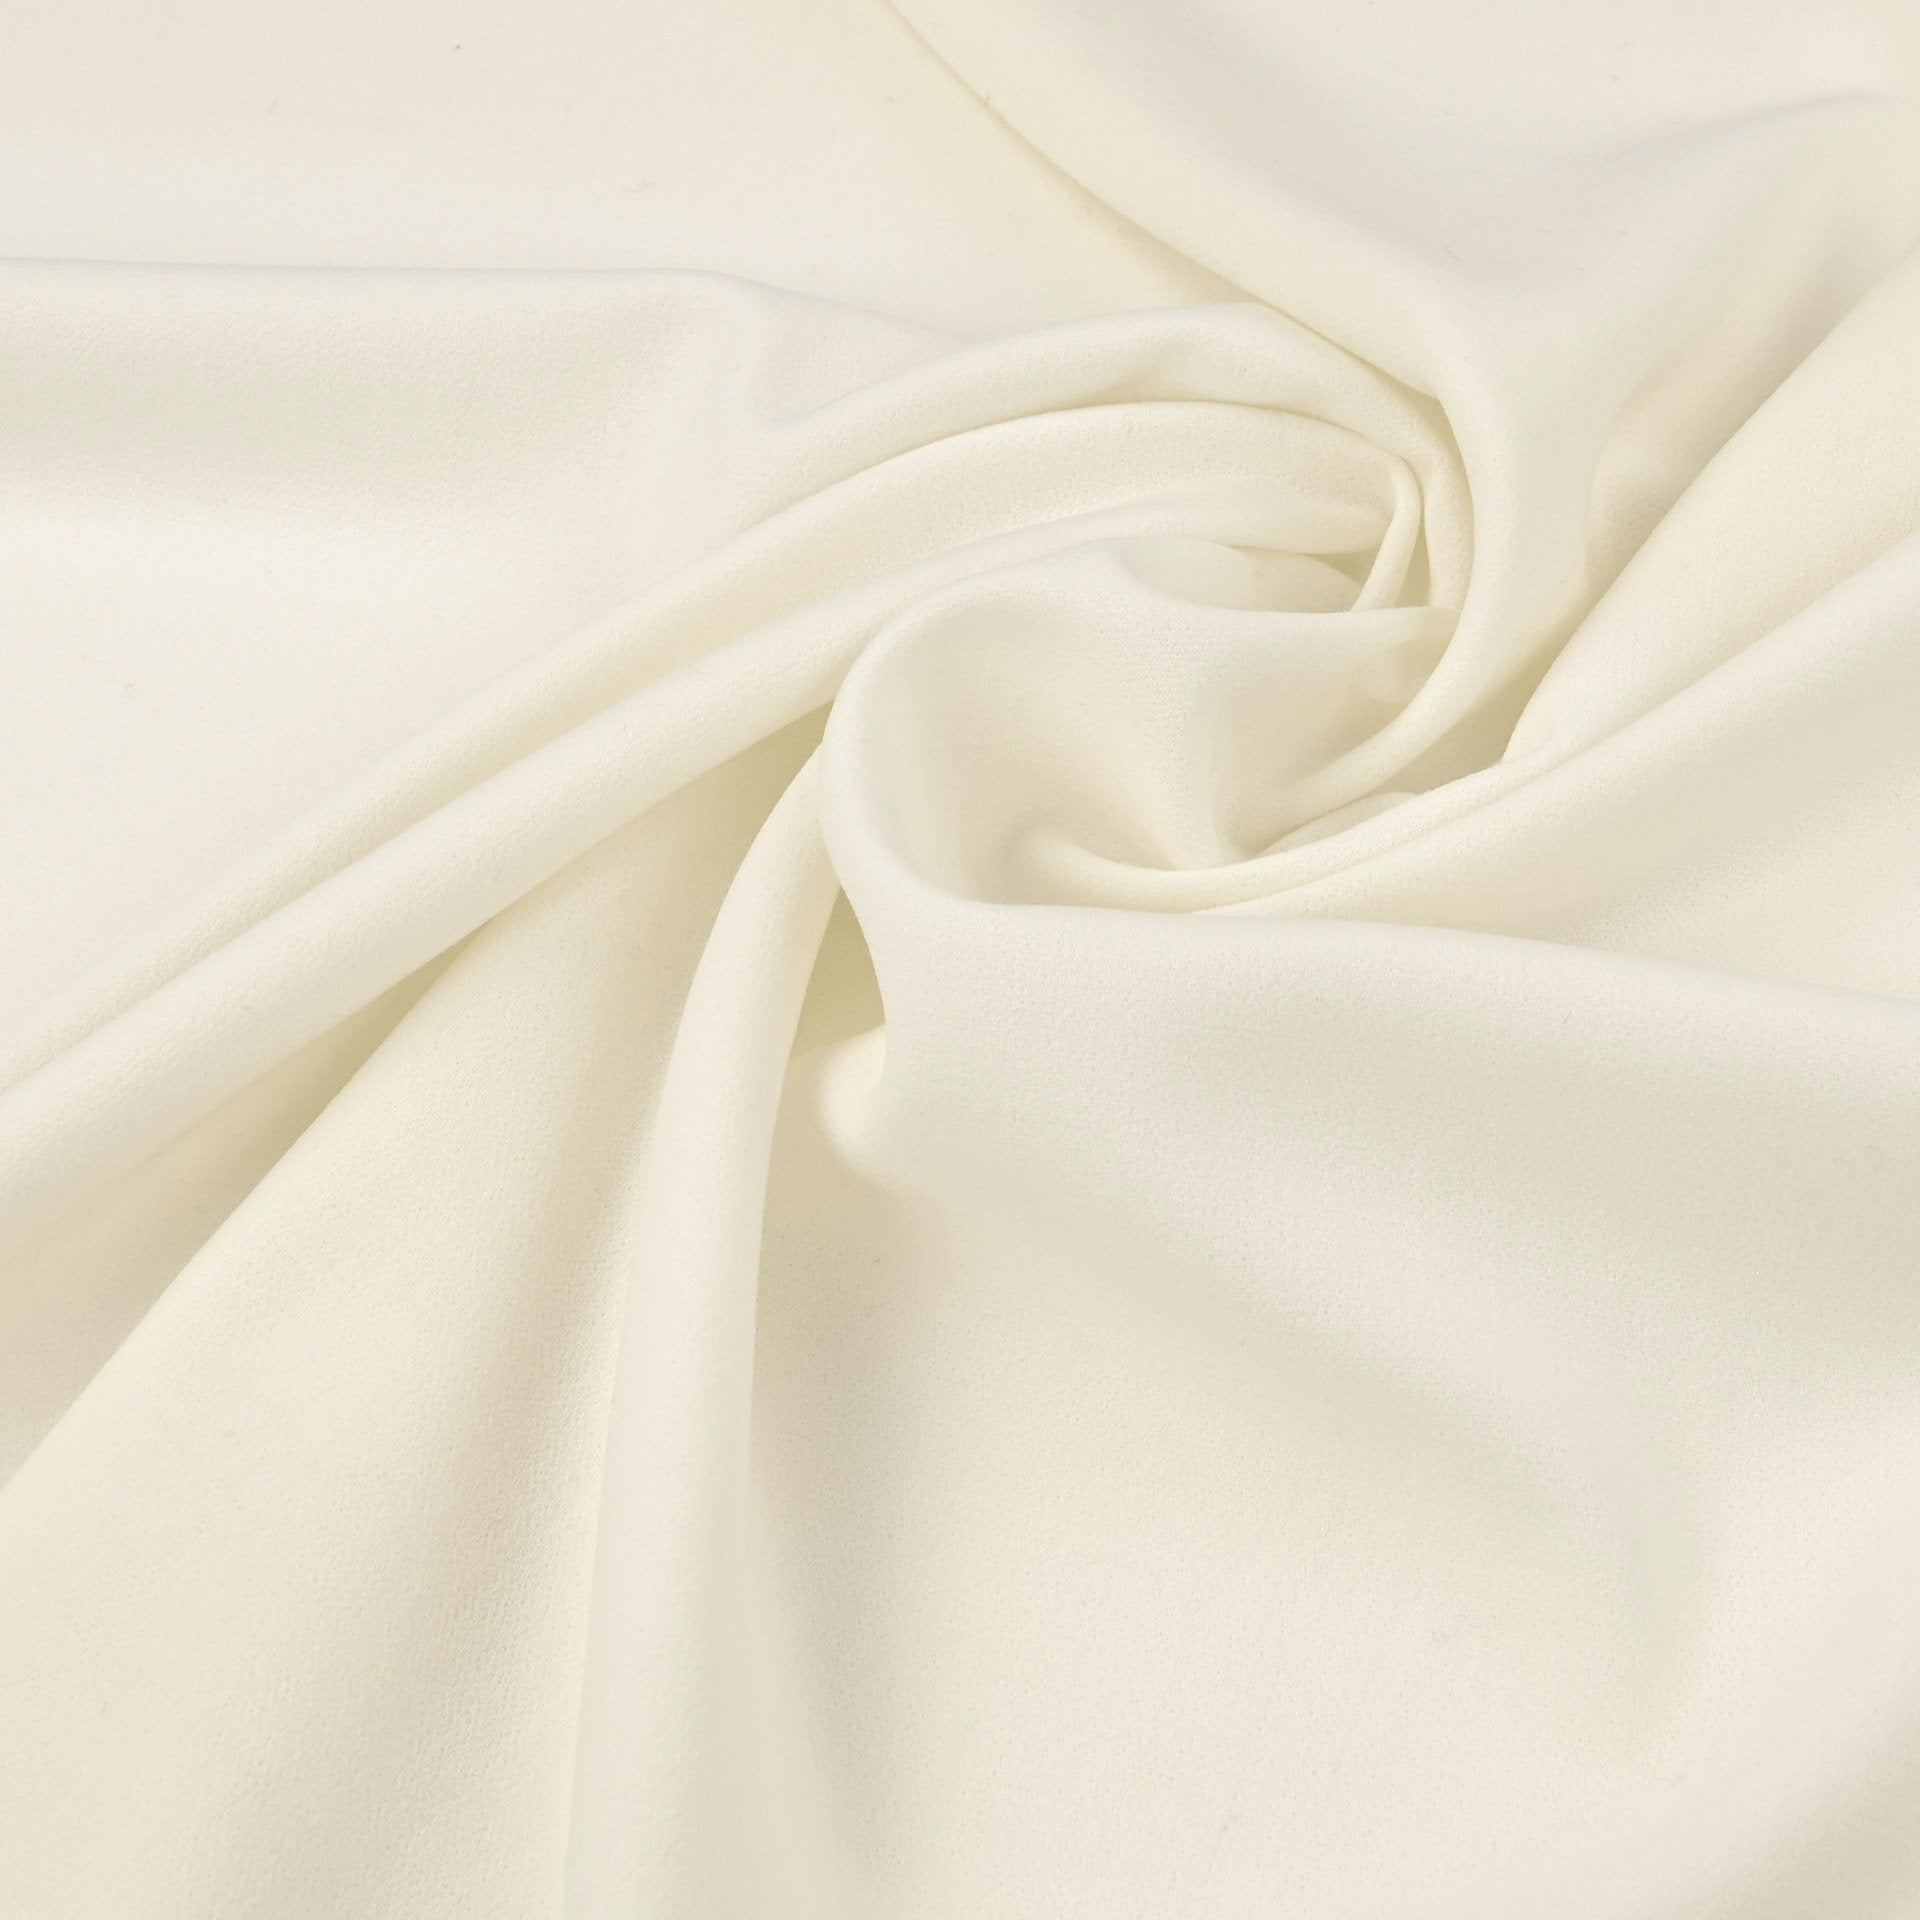 Products Cream Doublewave Crepe Fabric 97074